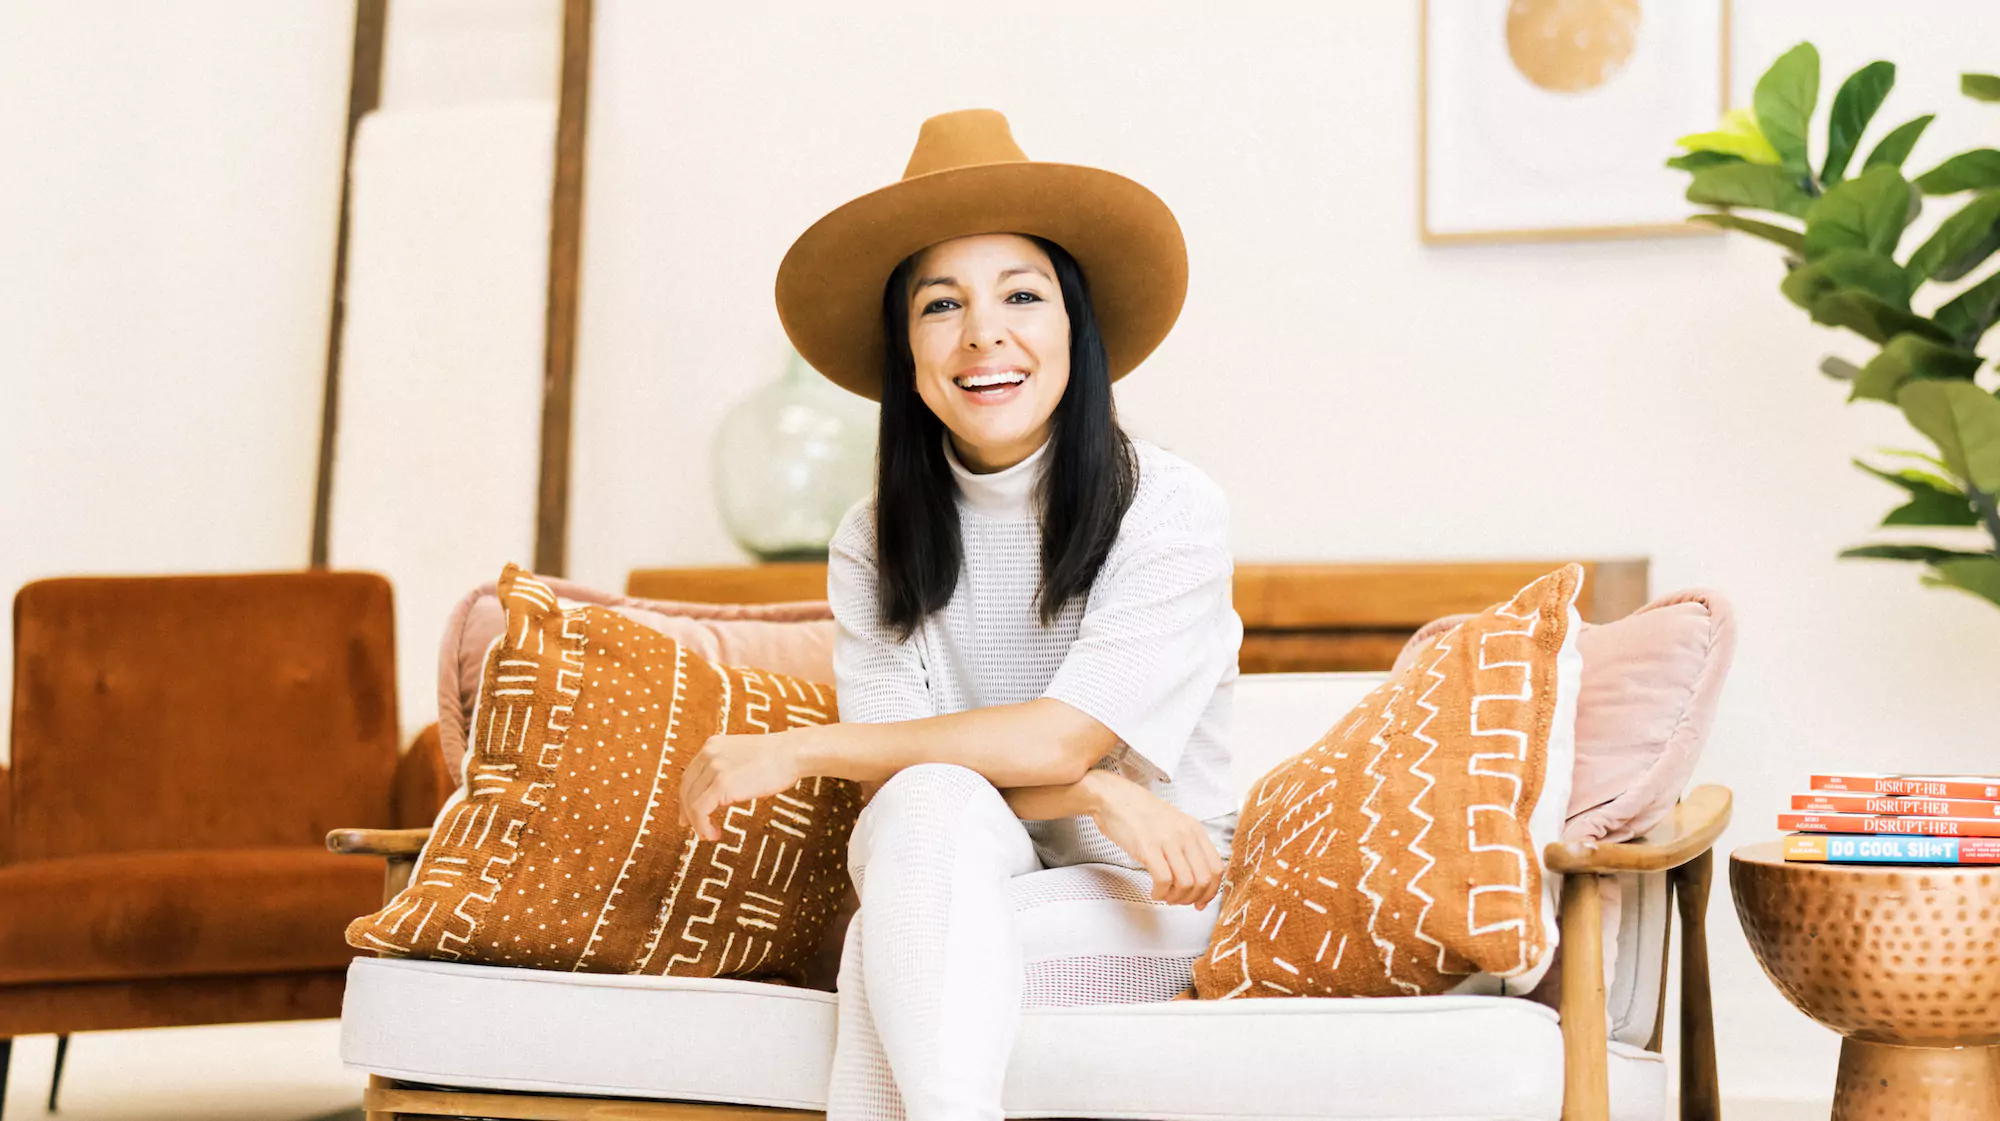 Miki Agrawal, founder of TUSHY, THINX, and WILD & trainer of Mindvalley's Zero to $100 Million Quest